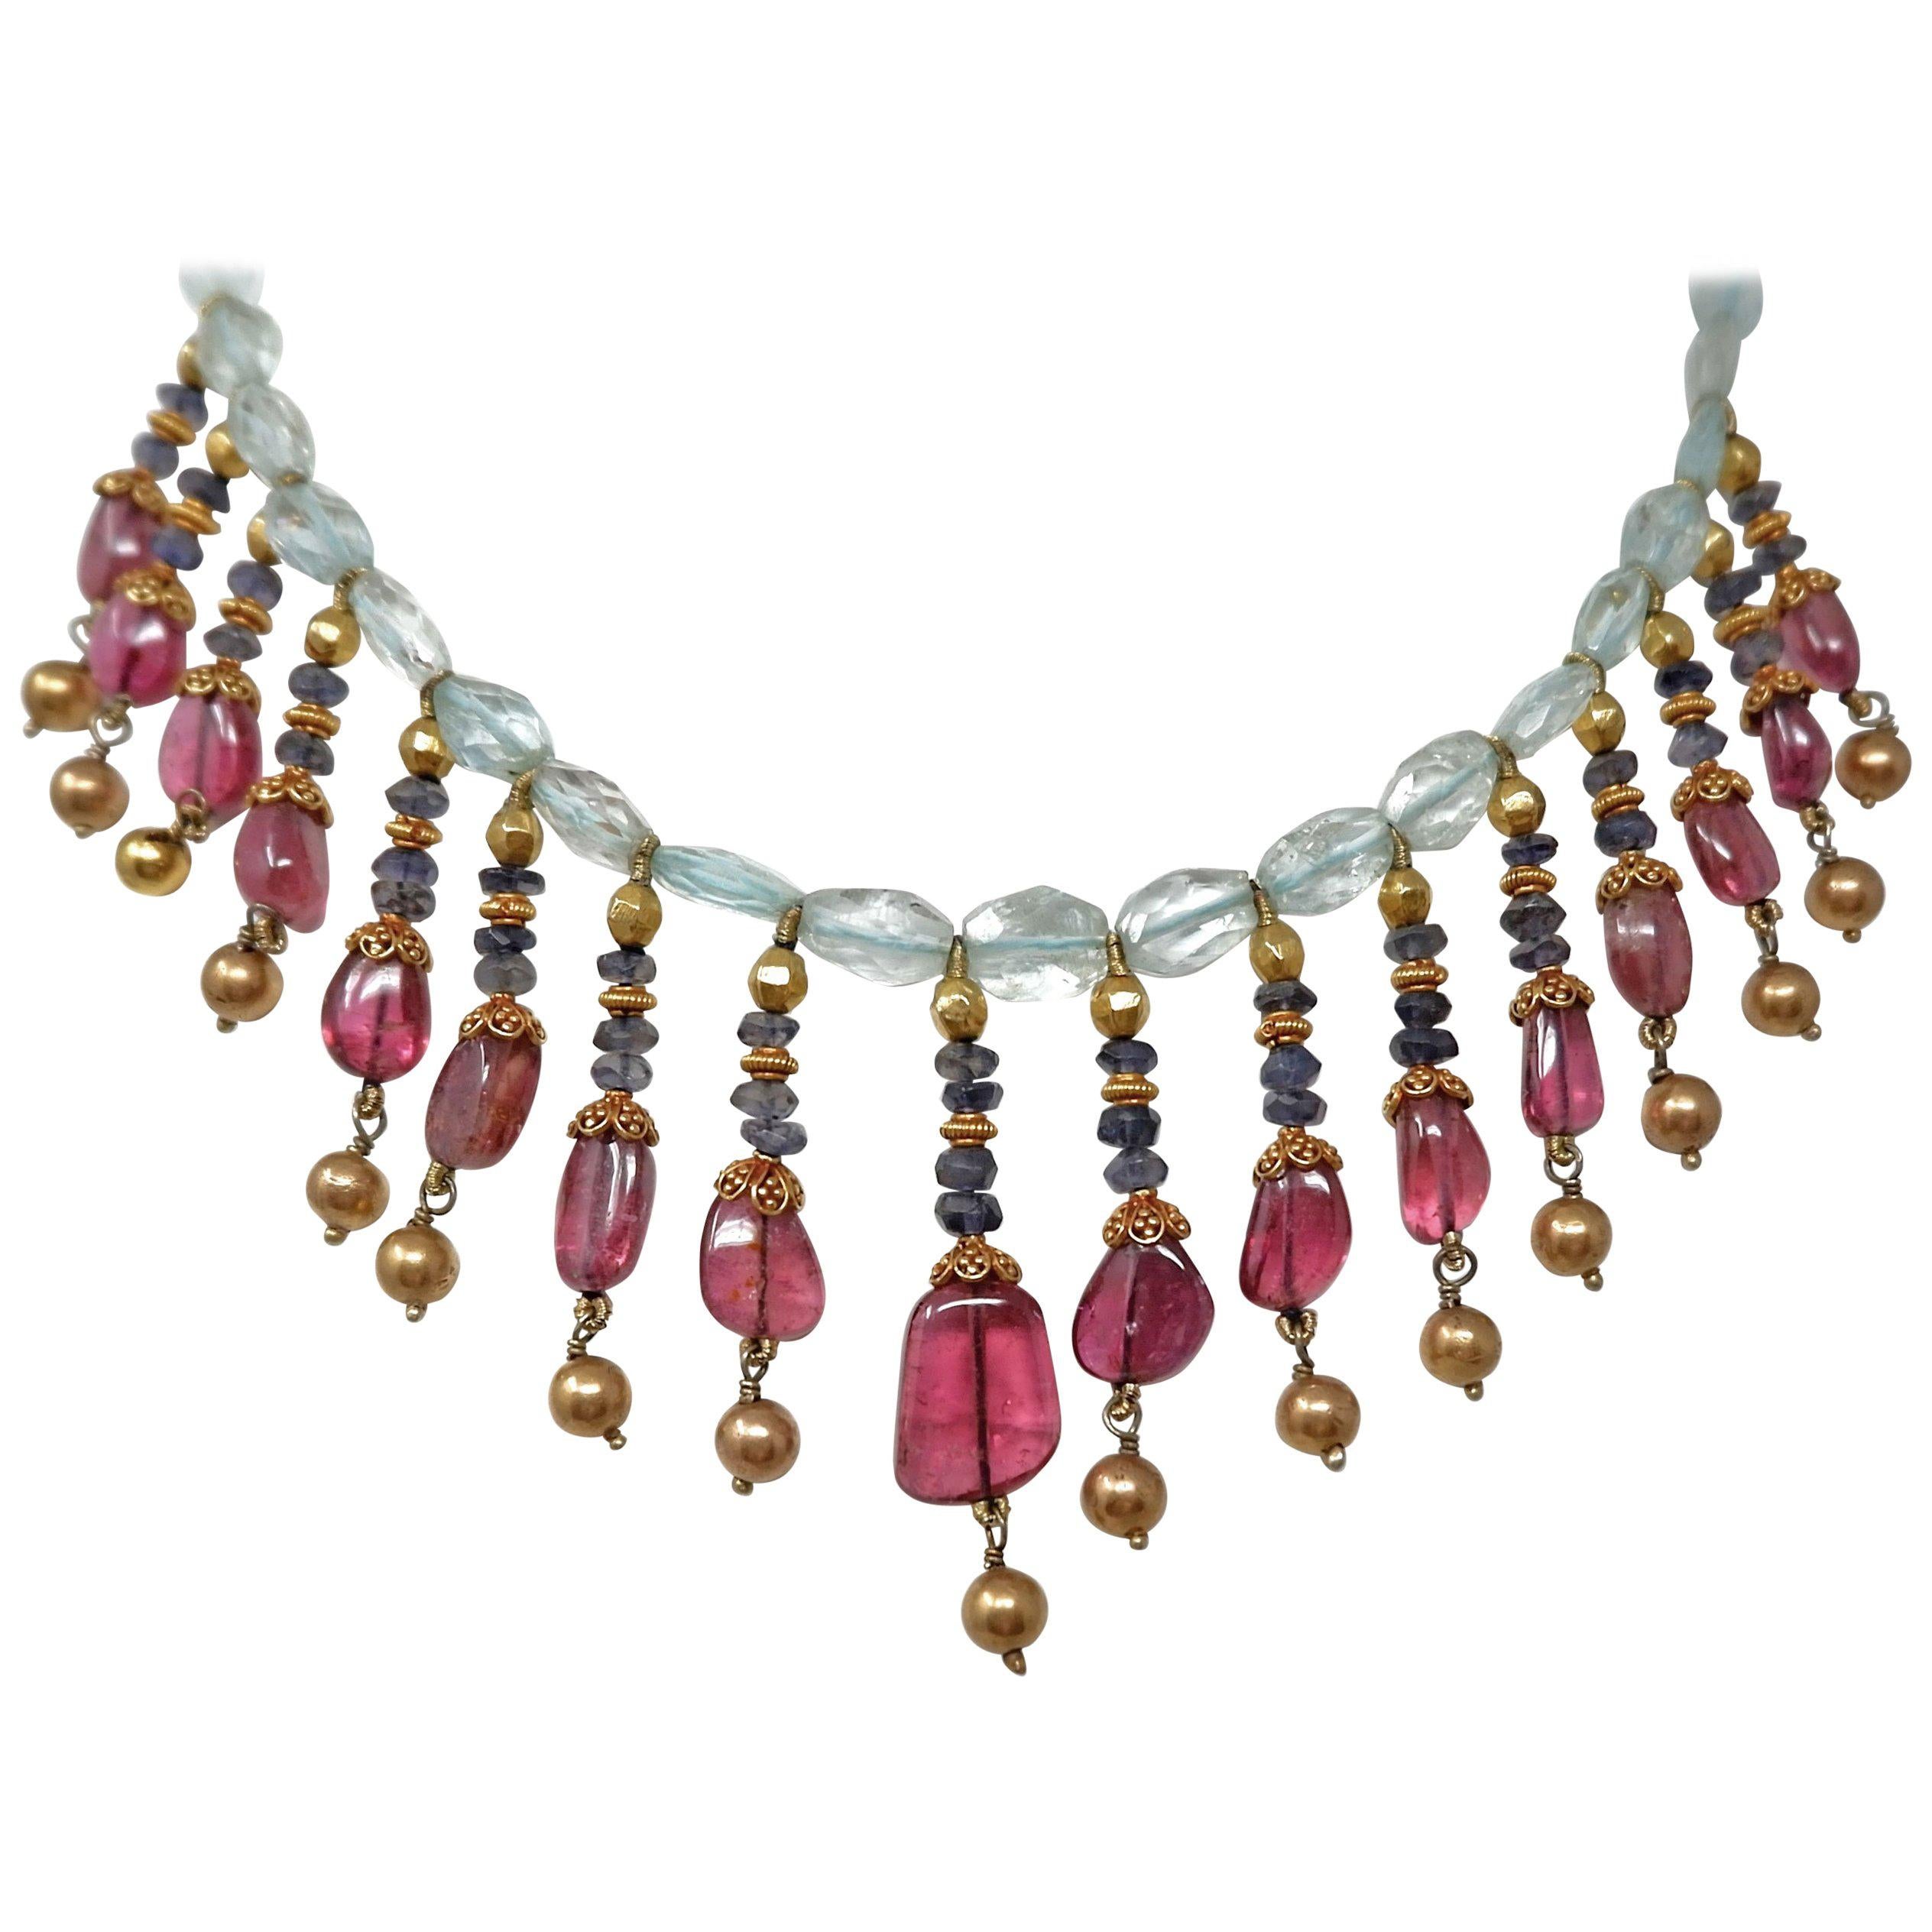  Aquamarine Tanzanite Rubellite and Gold Bead Indian Necklace For Sale